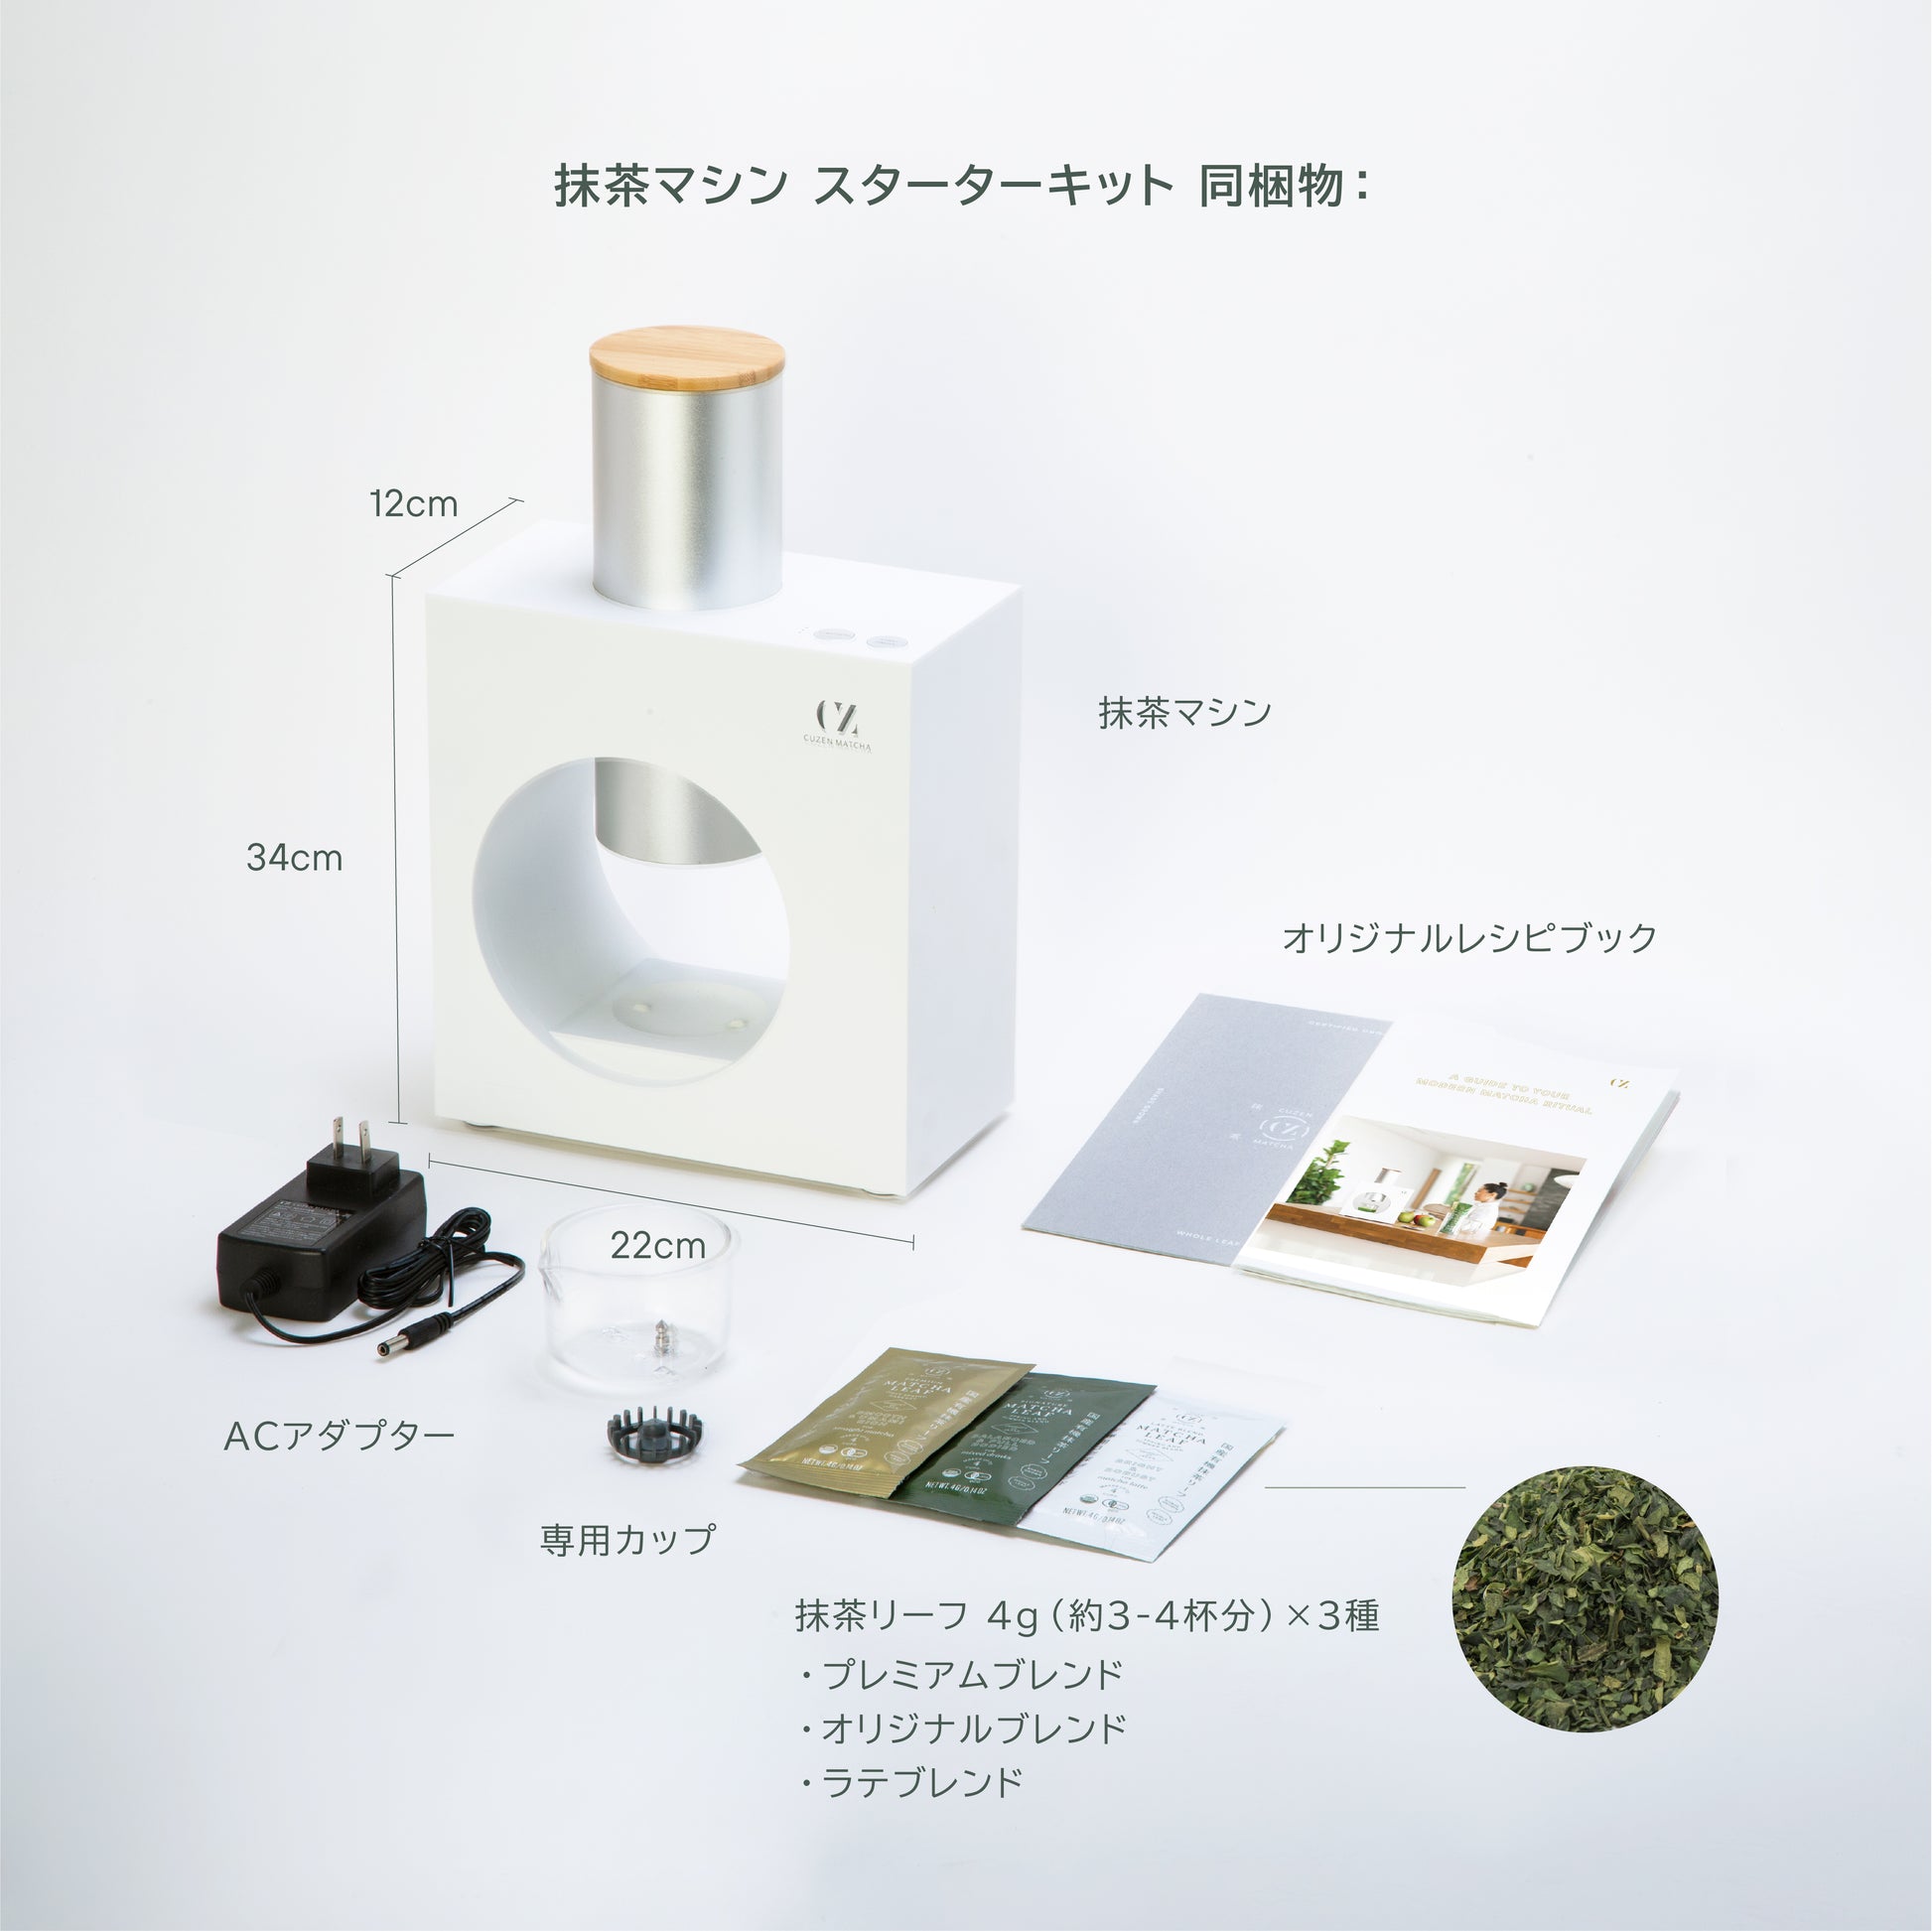 Display of included items with dimensions: Matcha Maker, AC adapter, cup & magnetic whisk, 3 Matcha Leaf packets.